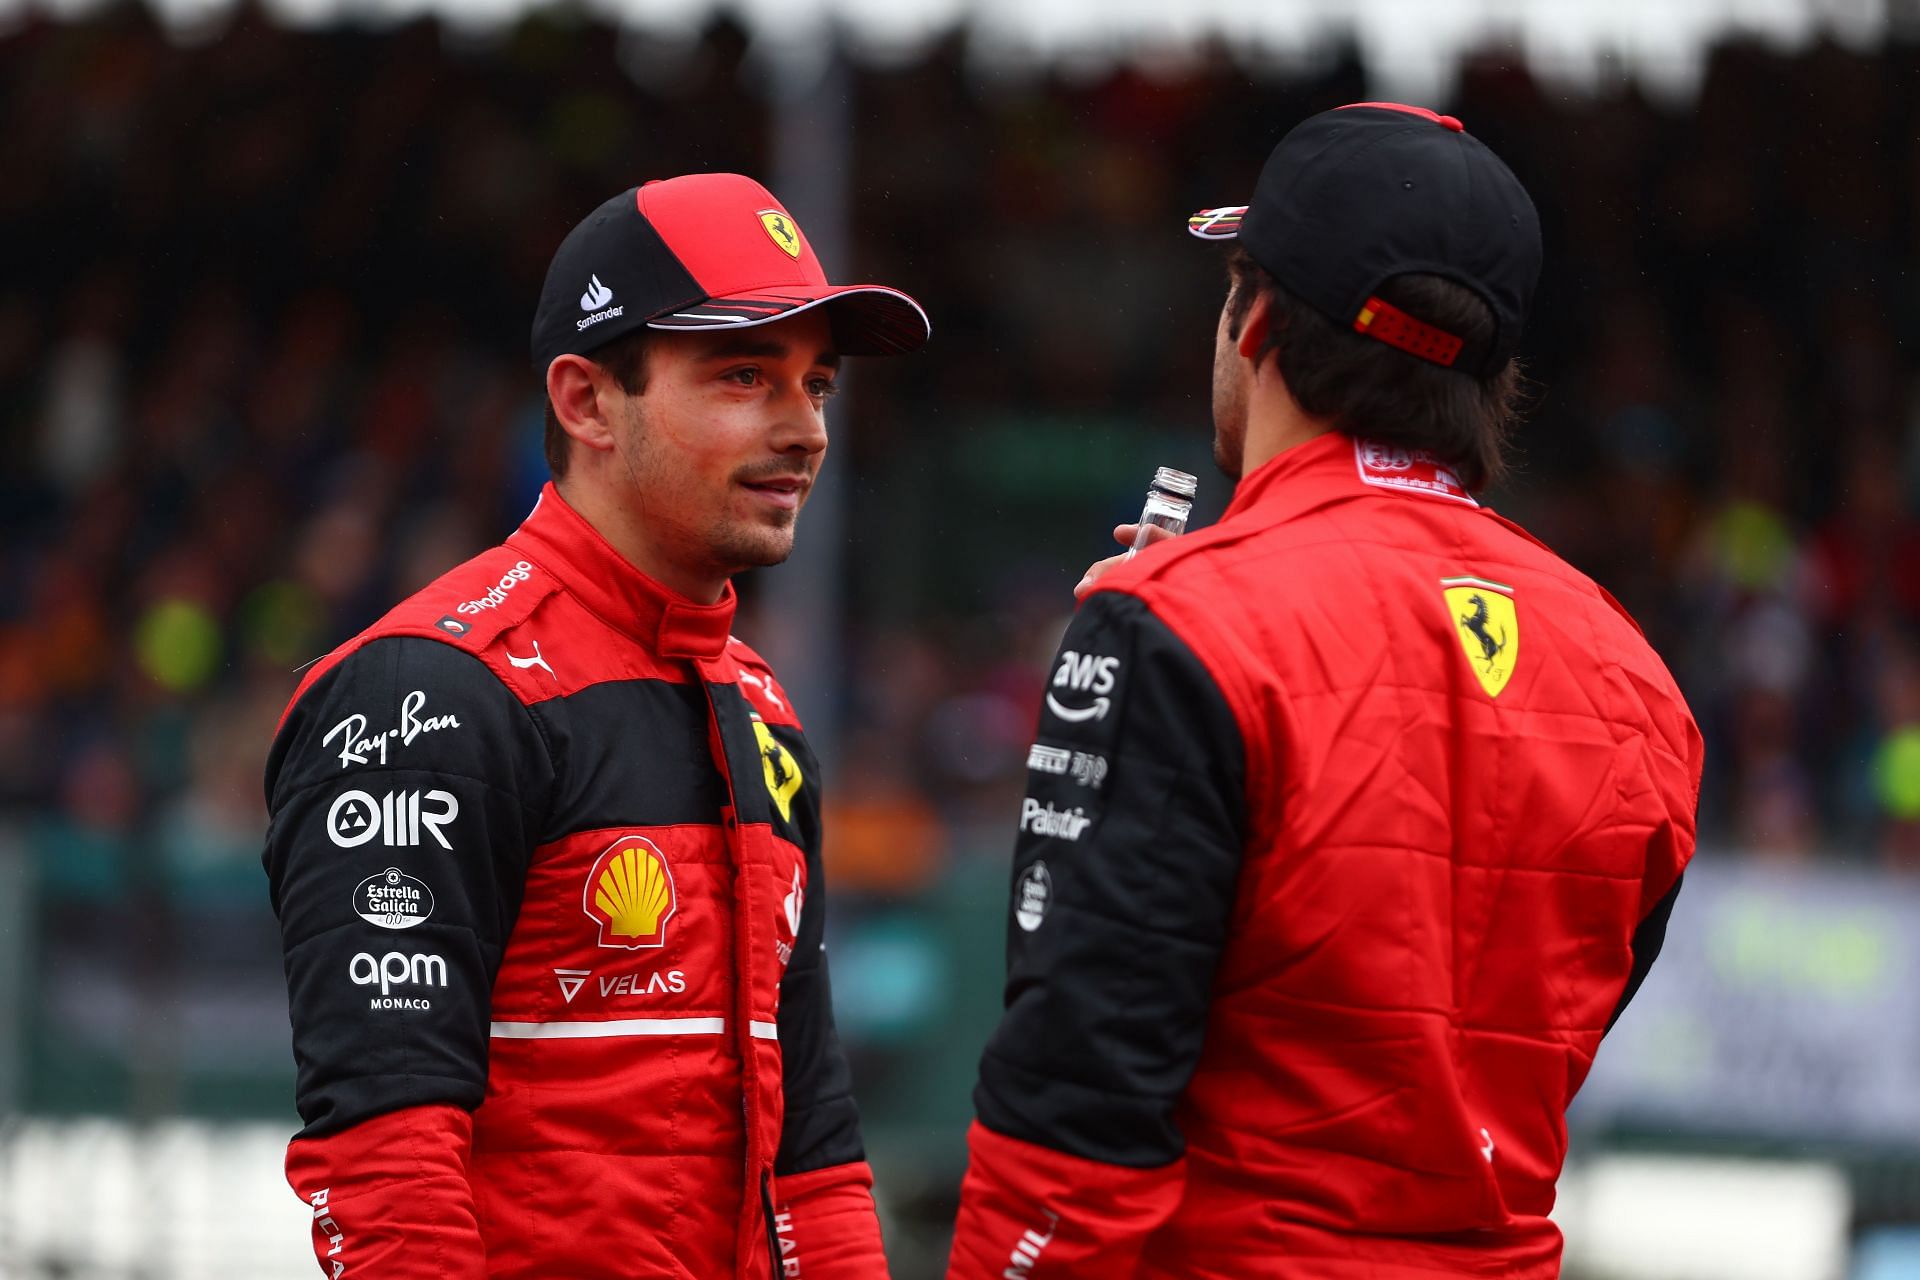 Charles Leclerc cannot afford to make these mistakes at this stage of the season.